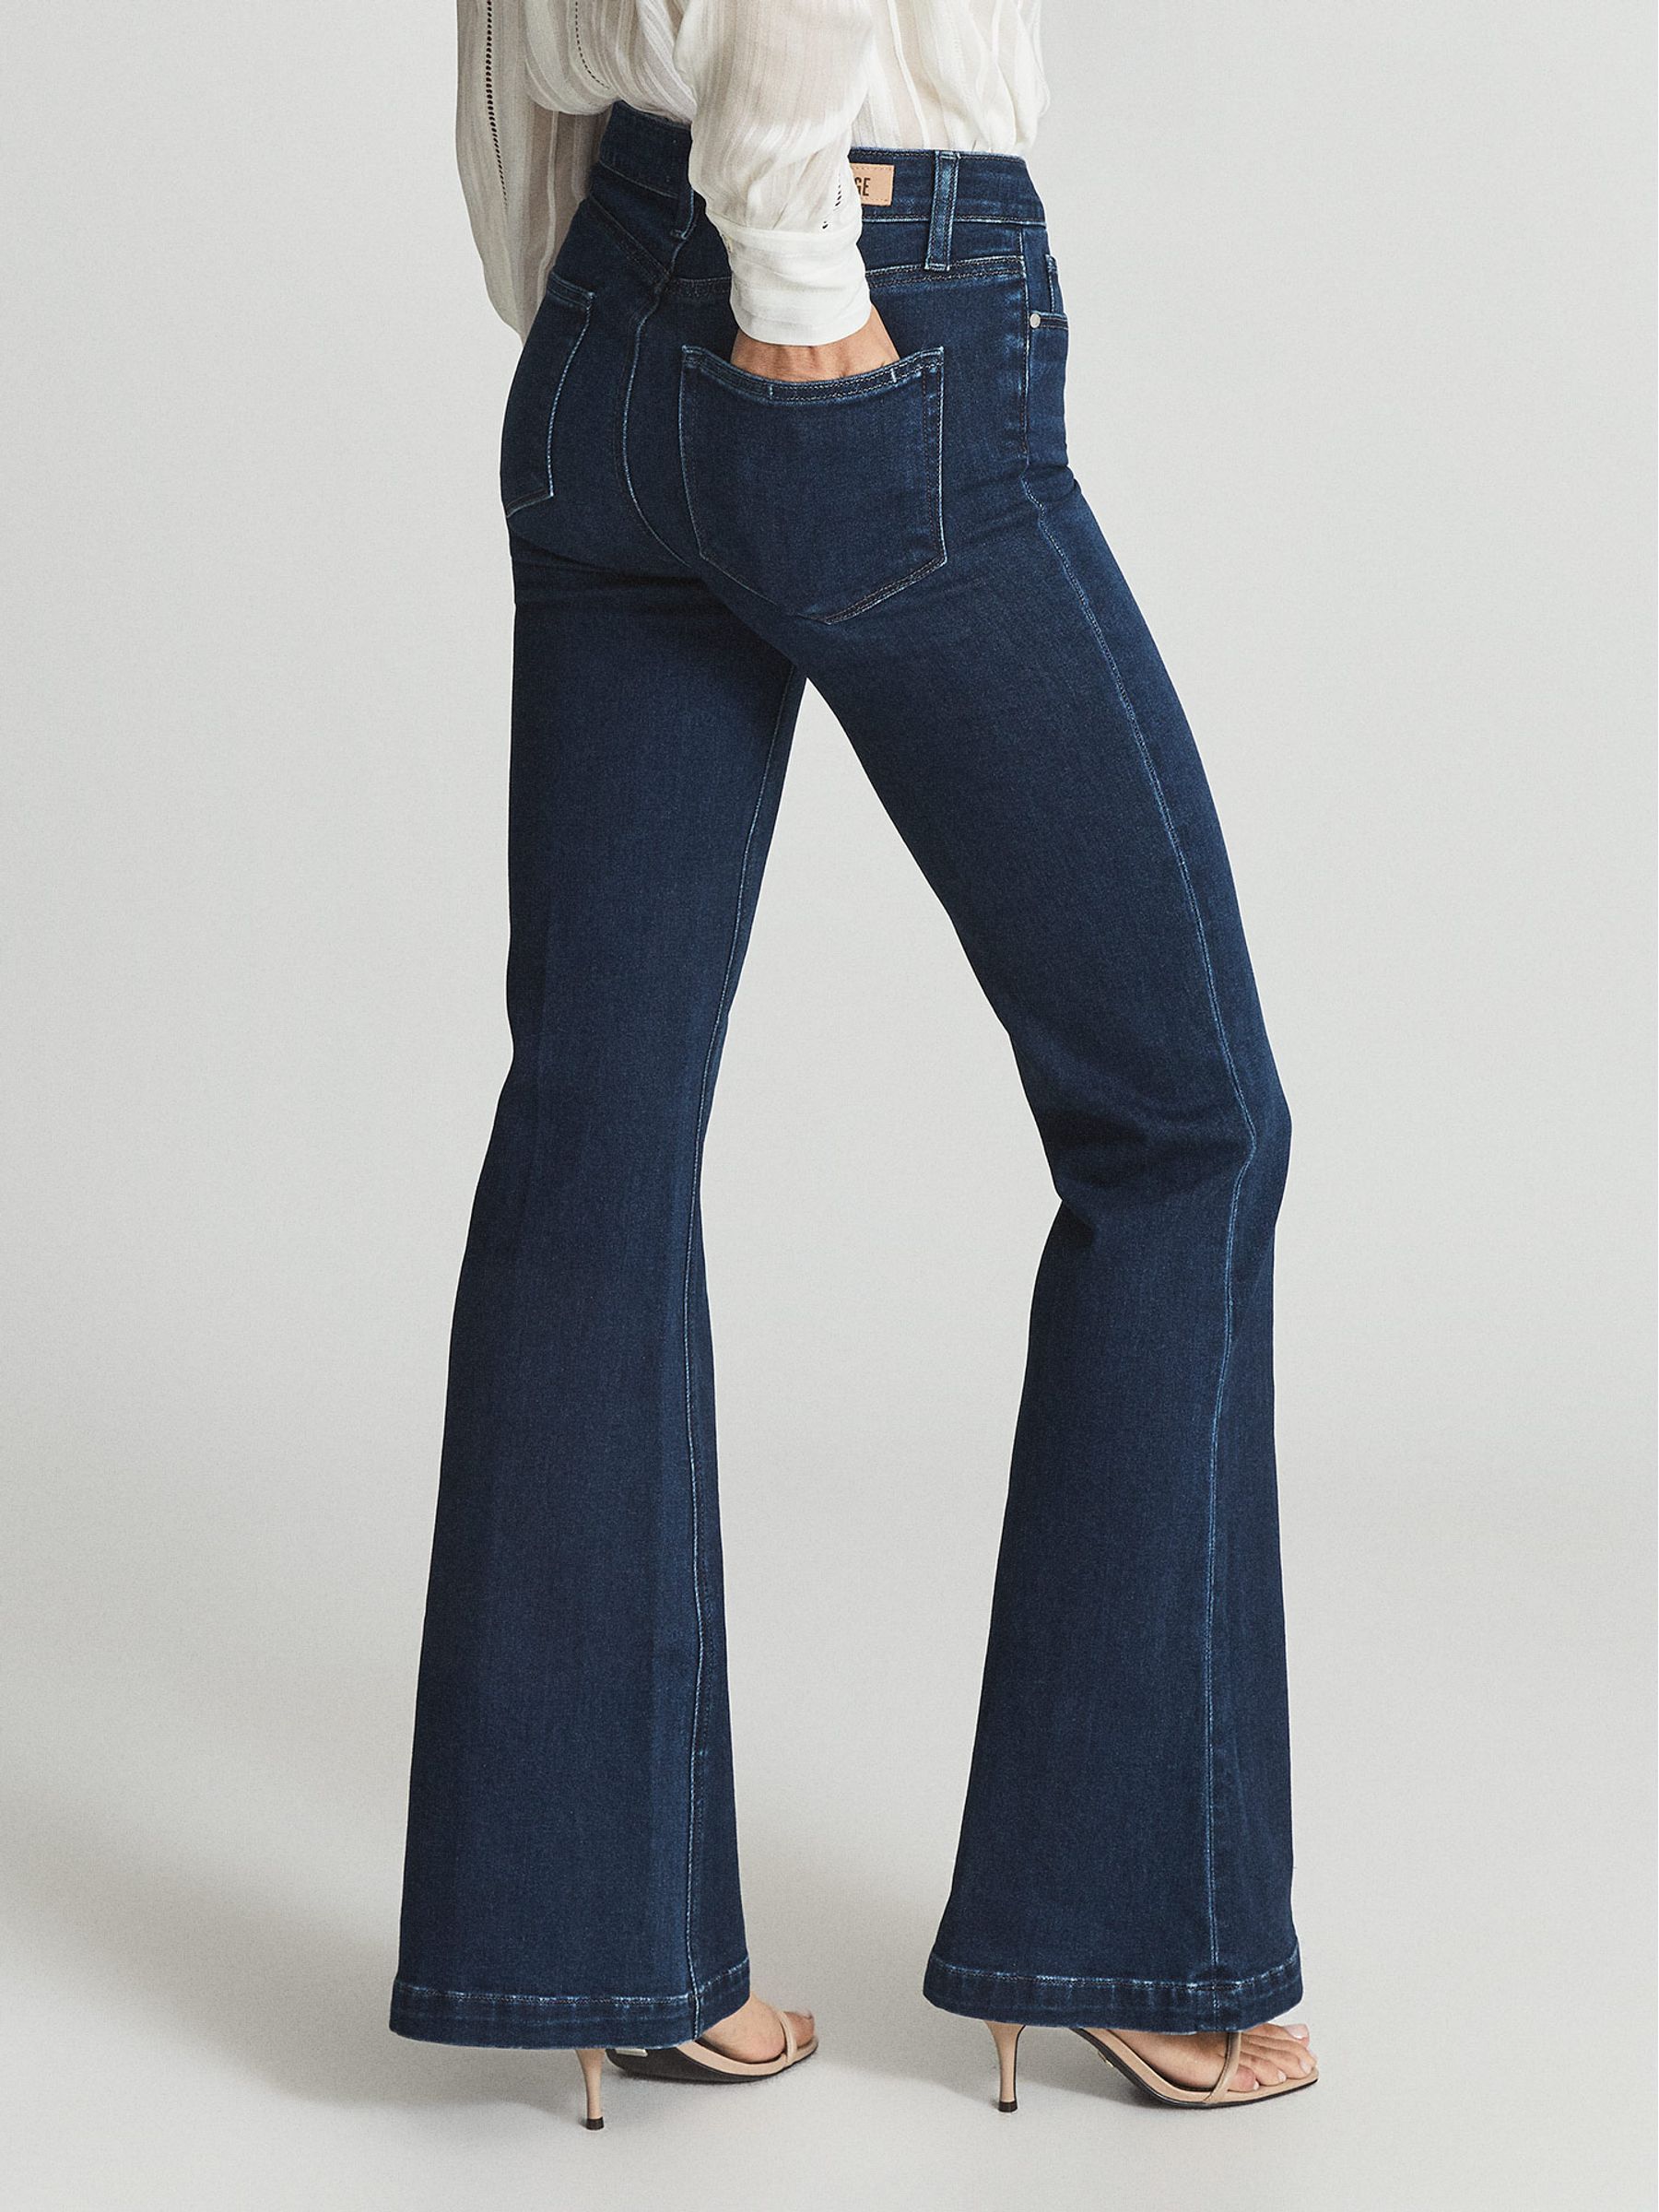 Paige High Rise Flared Jeans - REISS